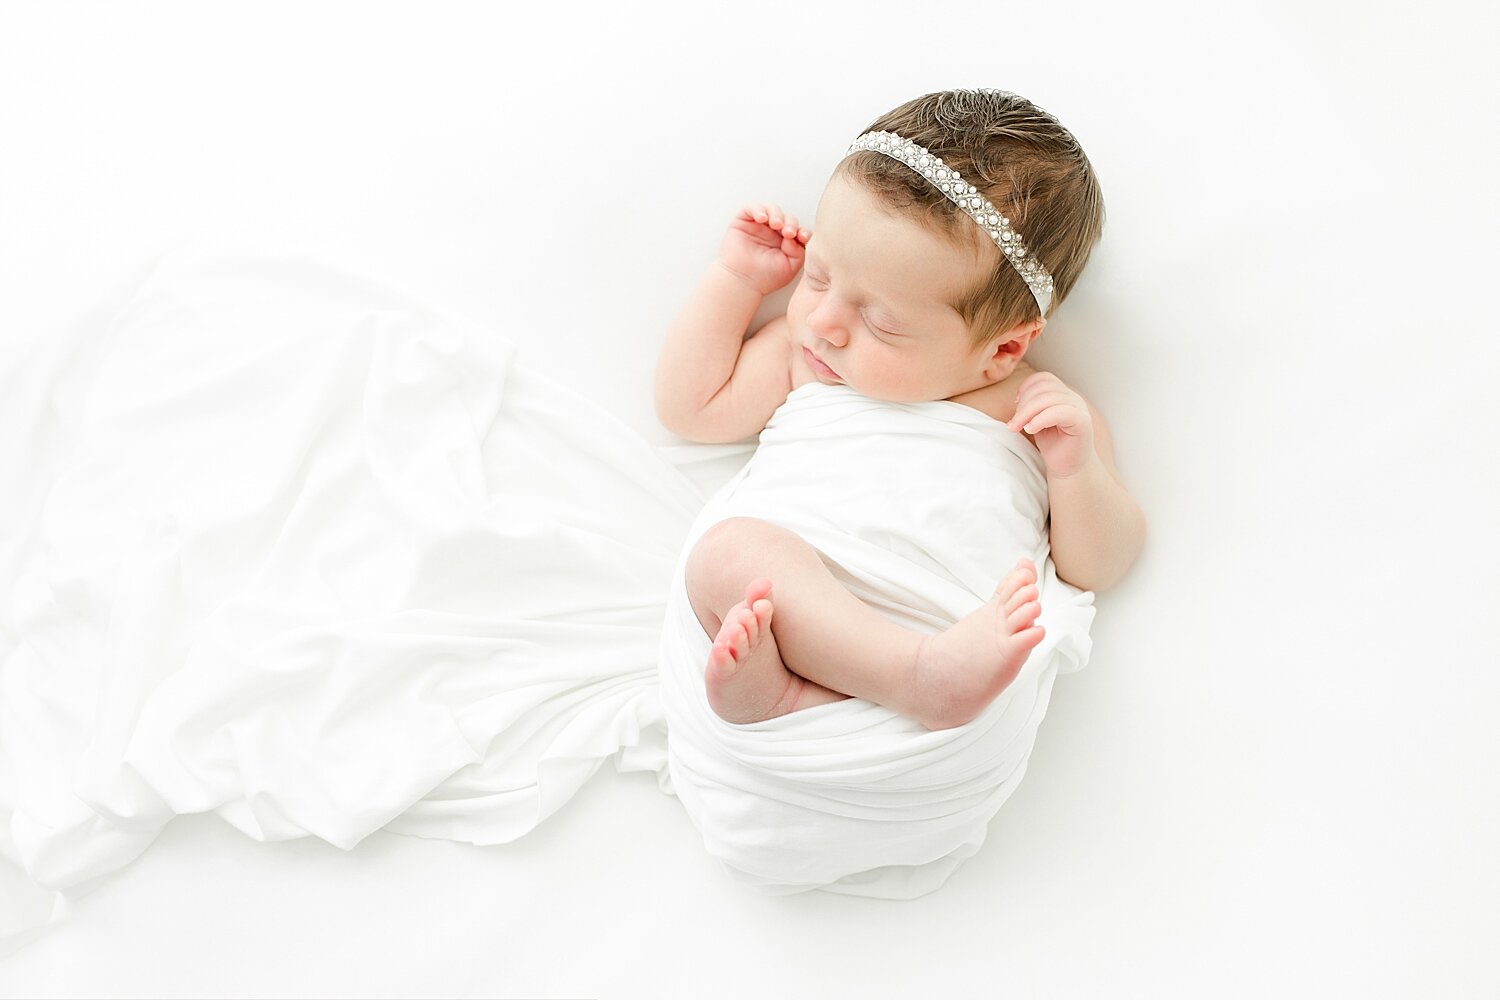 Baby girl swaddled in a white blanket on a white backdrop for newborn session. Photos by Kristin Wood Photography.